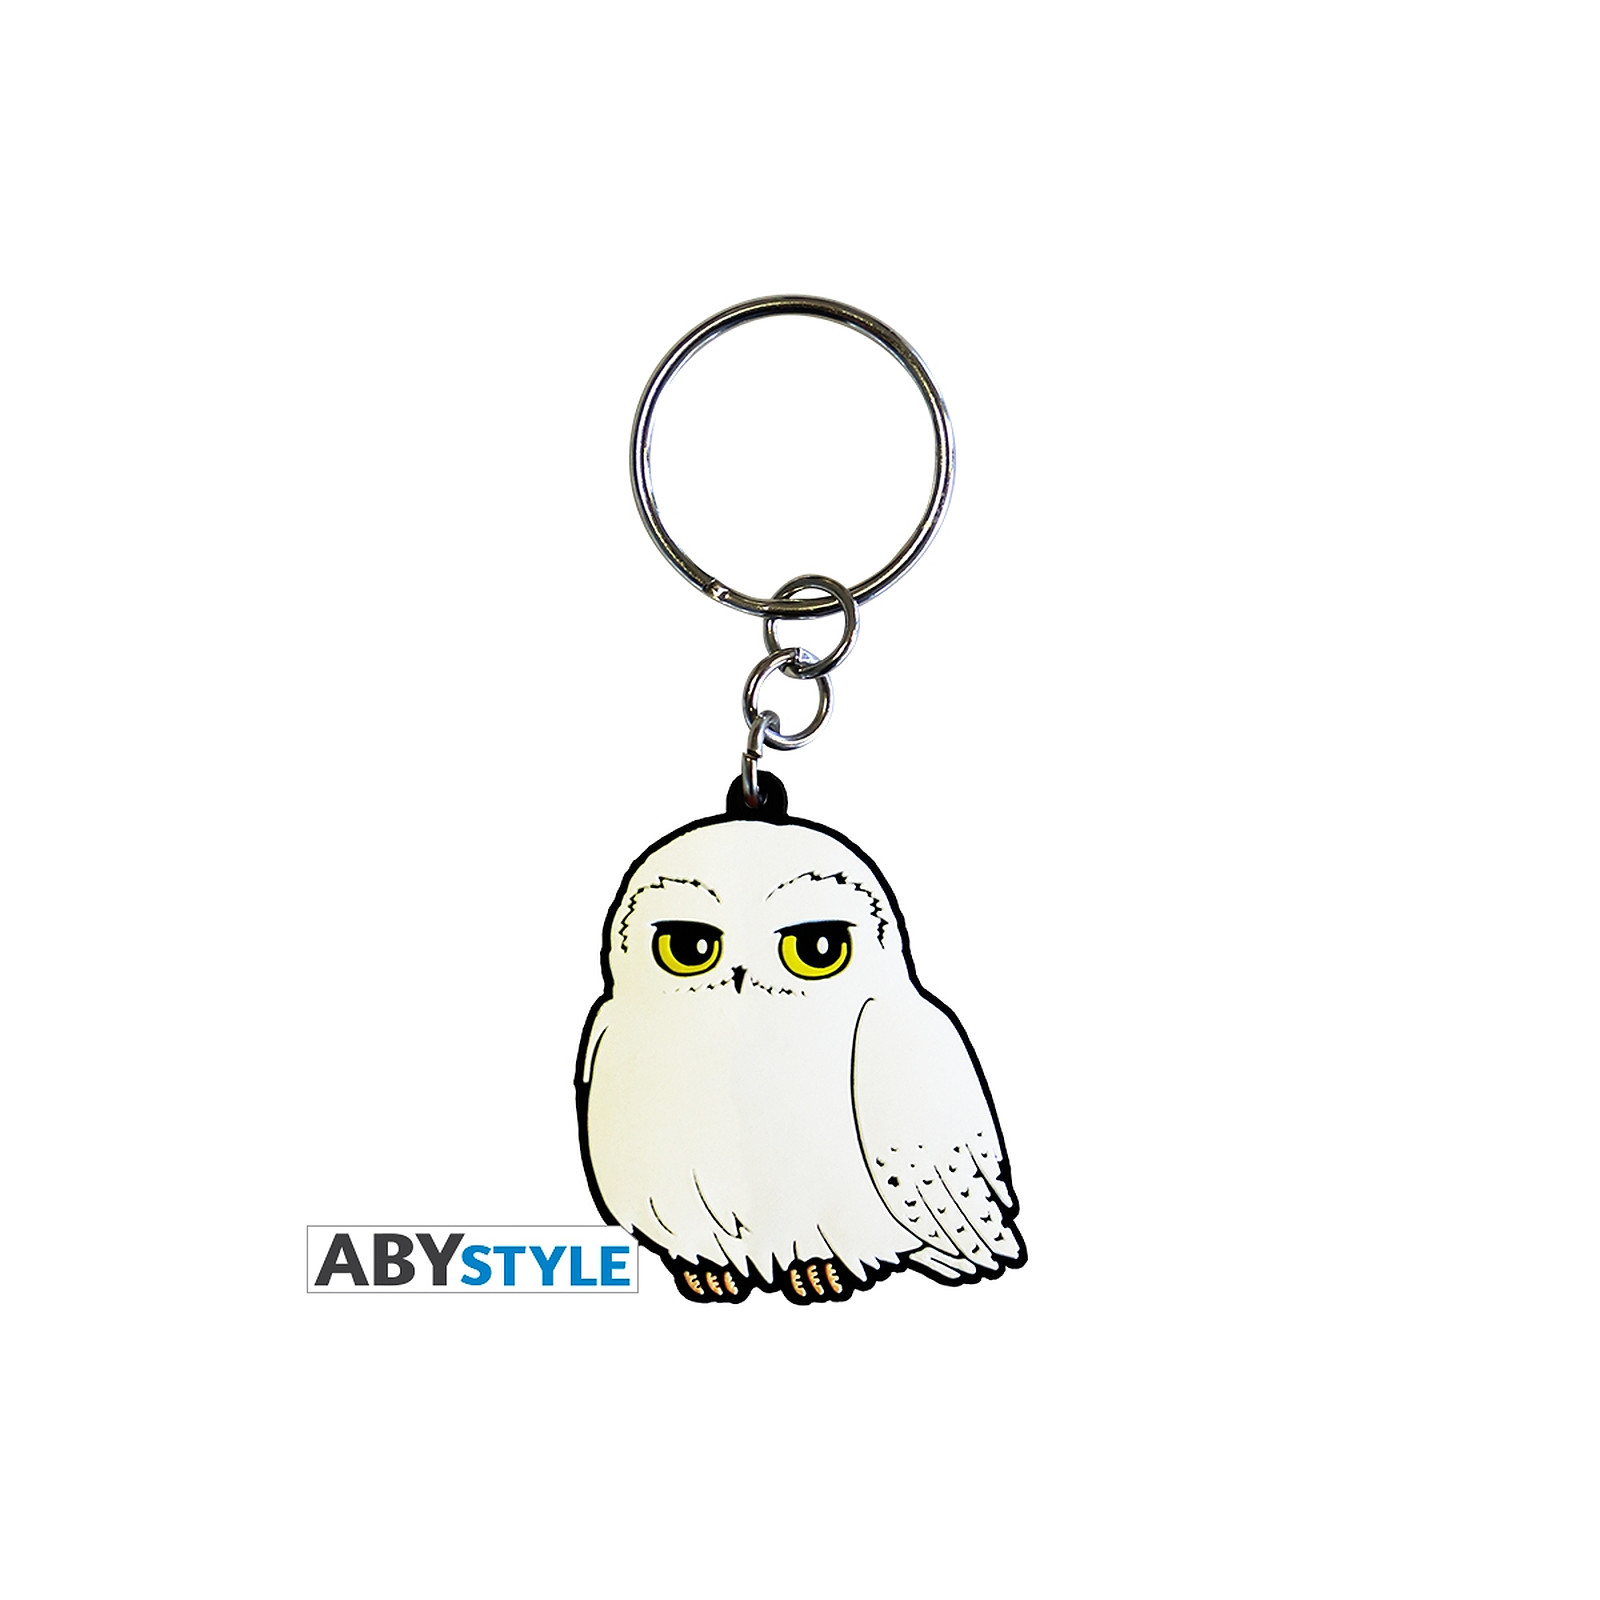 Harry Potter - Porte-cles Hedwige - Porte-cles Abystyle